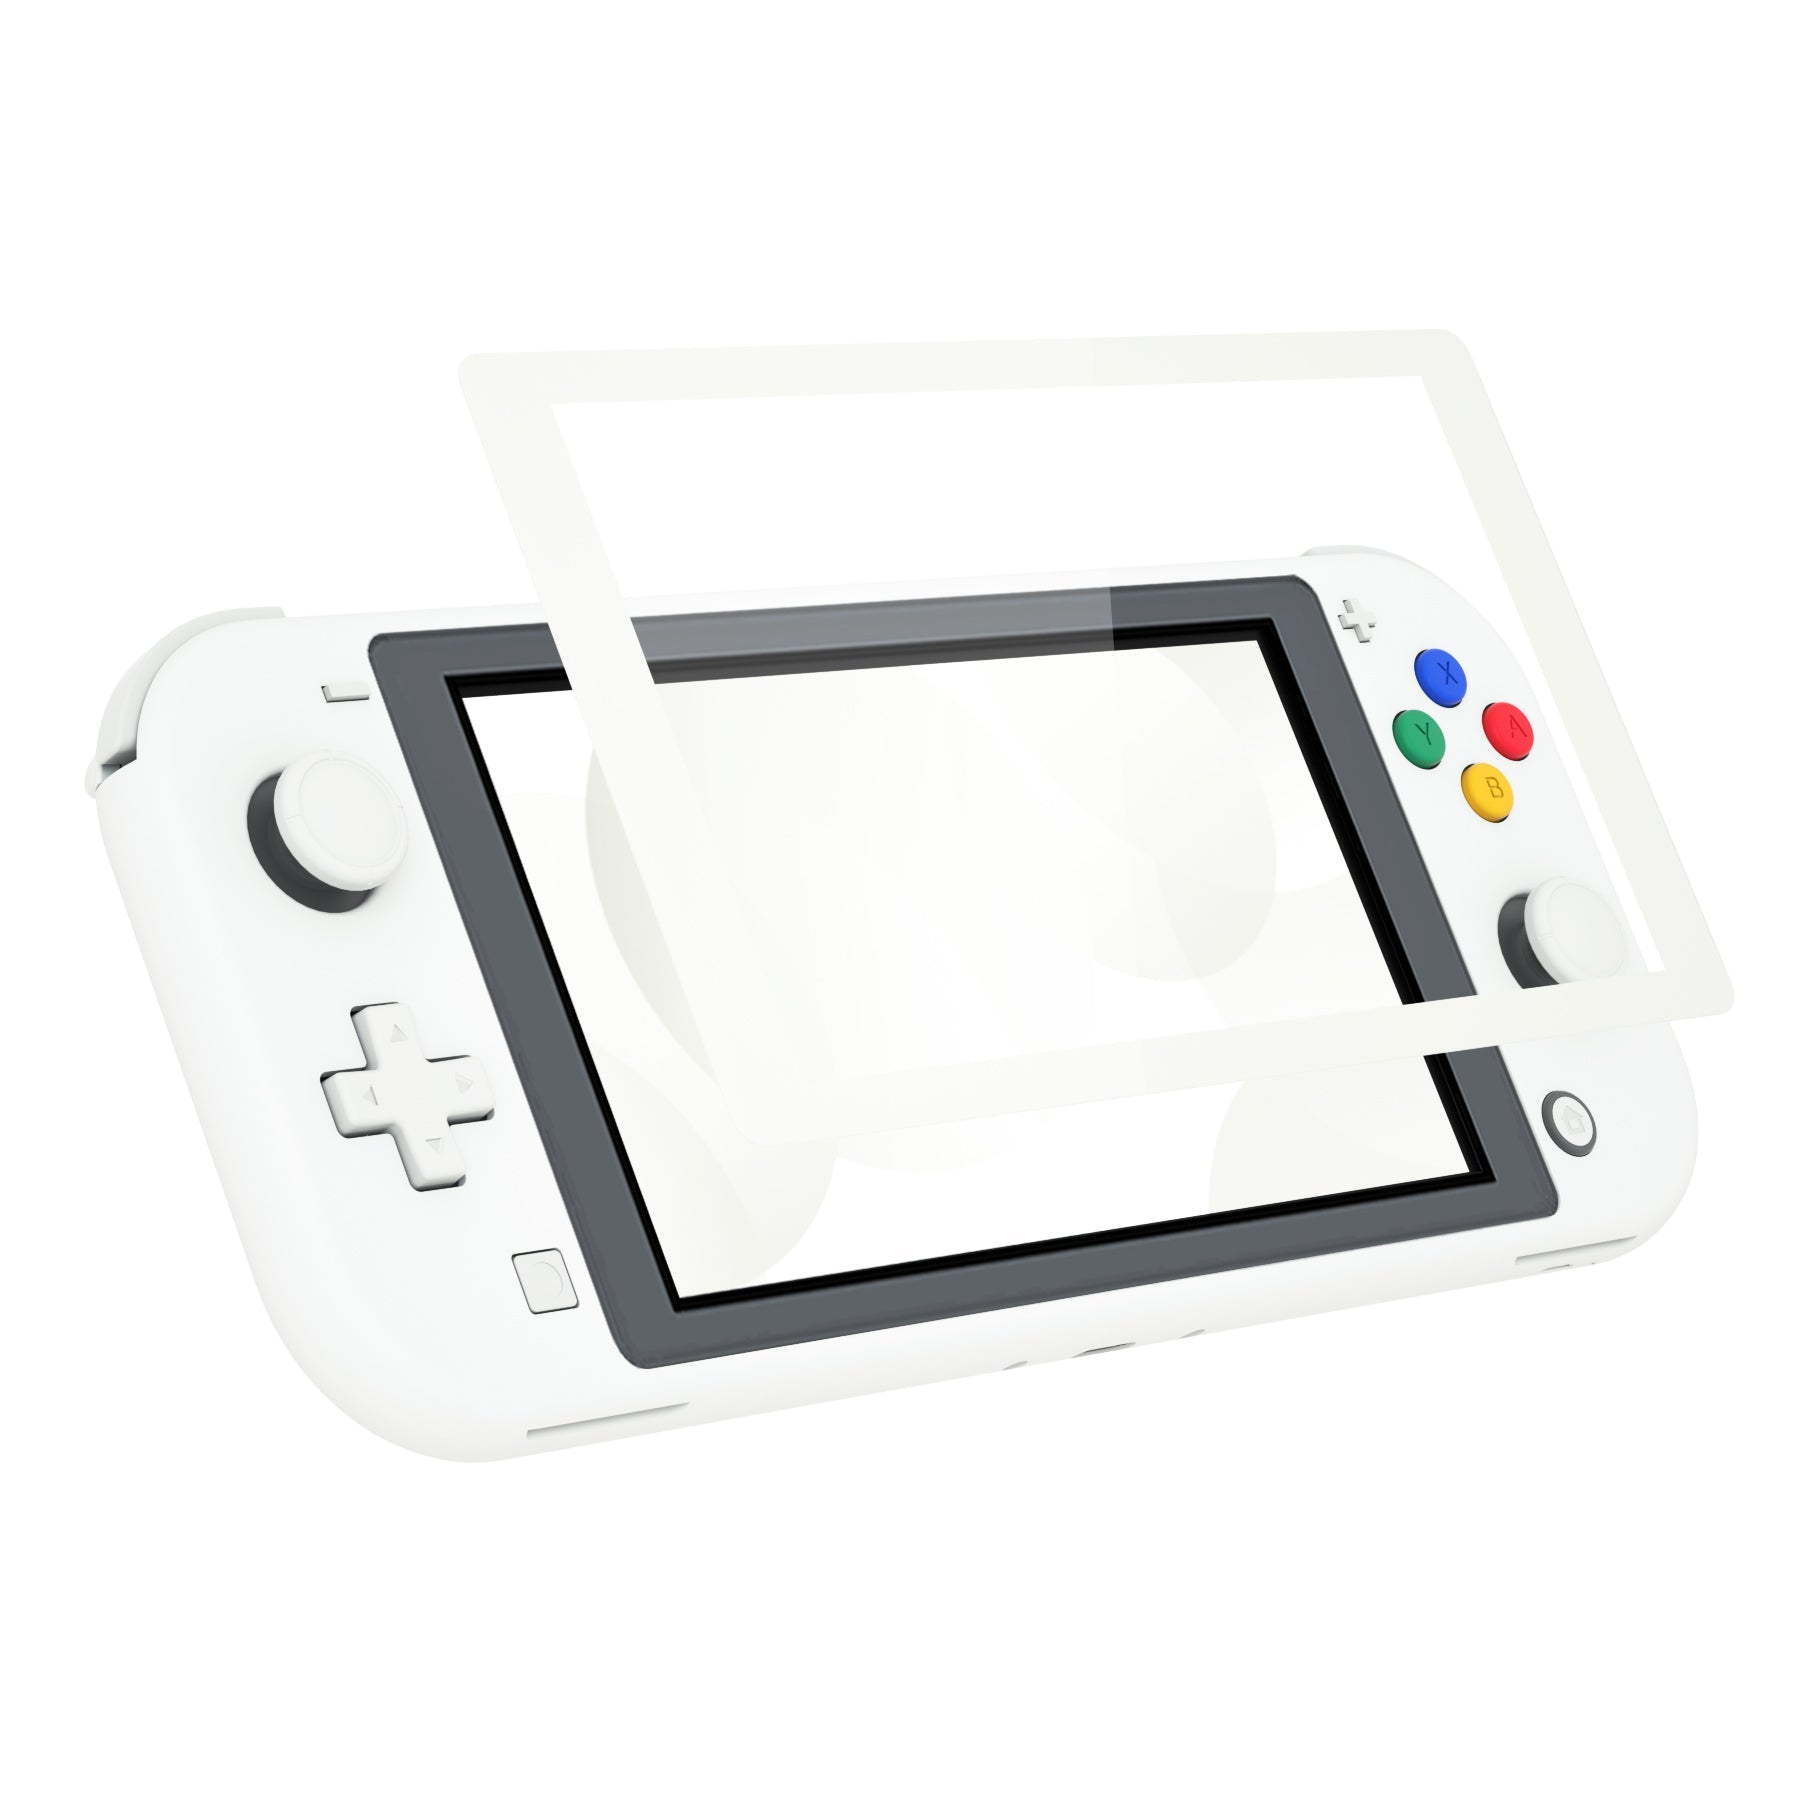 Replacement Housing Shell for with Screen Protector for Nintendo Switch  Lite - White